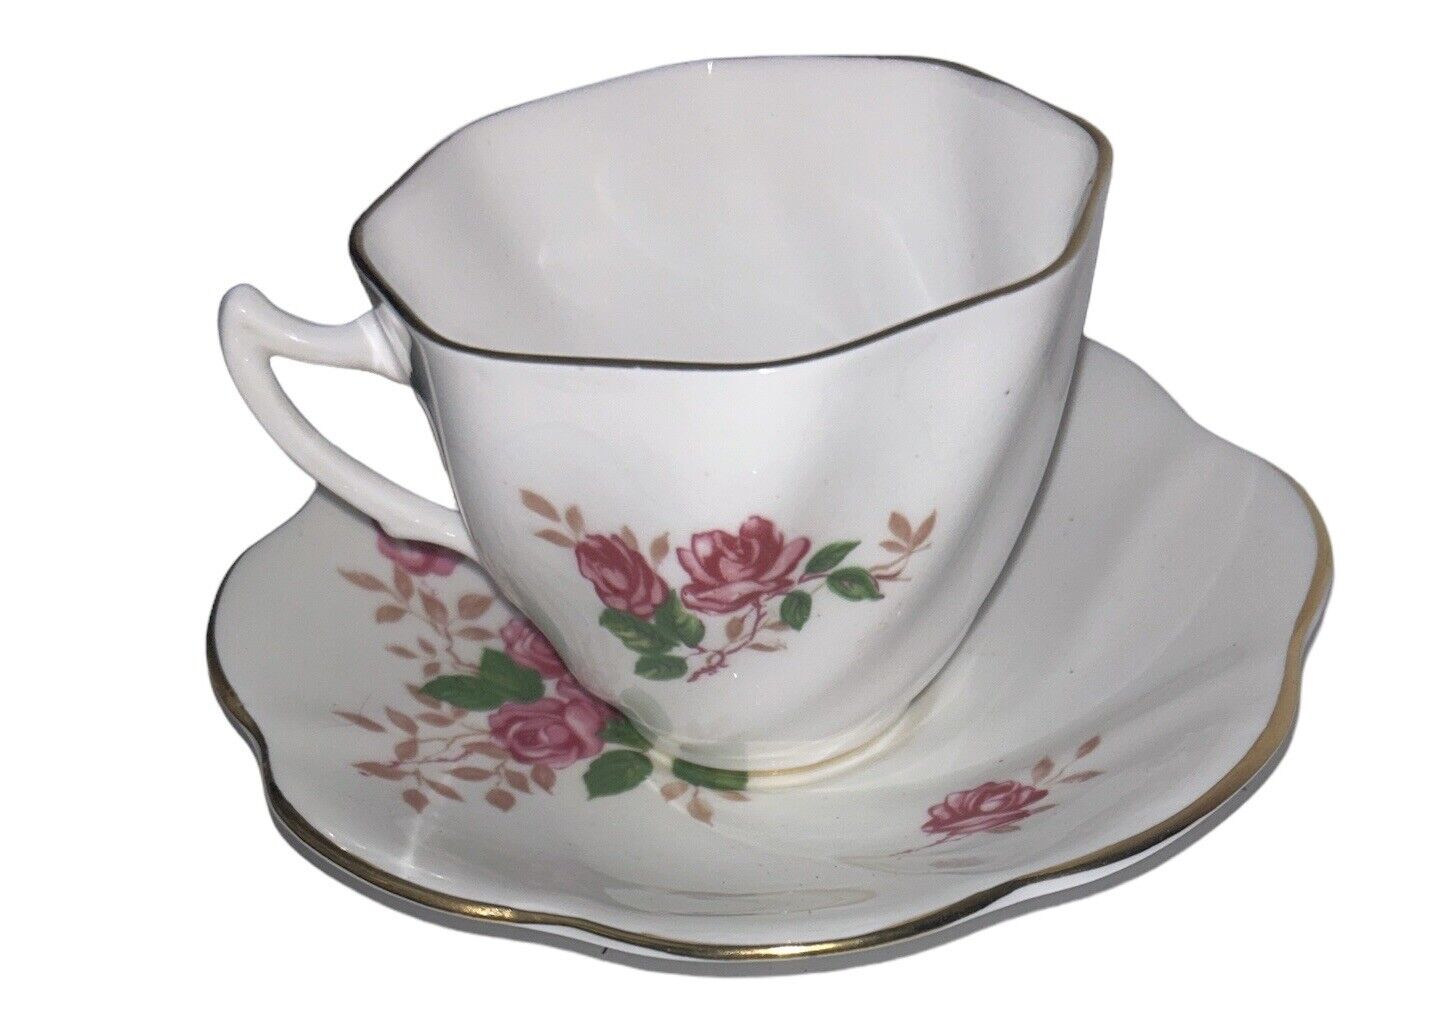 Teacup and Saucer with Pink Roses, Signed with a Crown, England